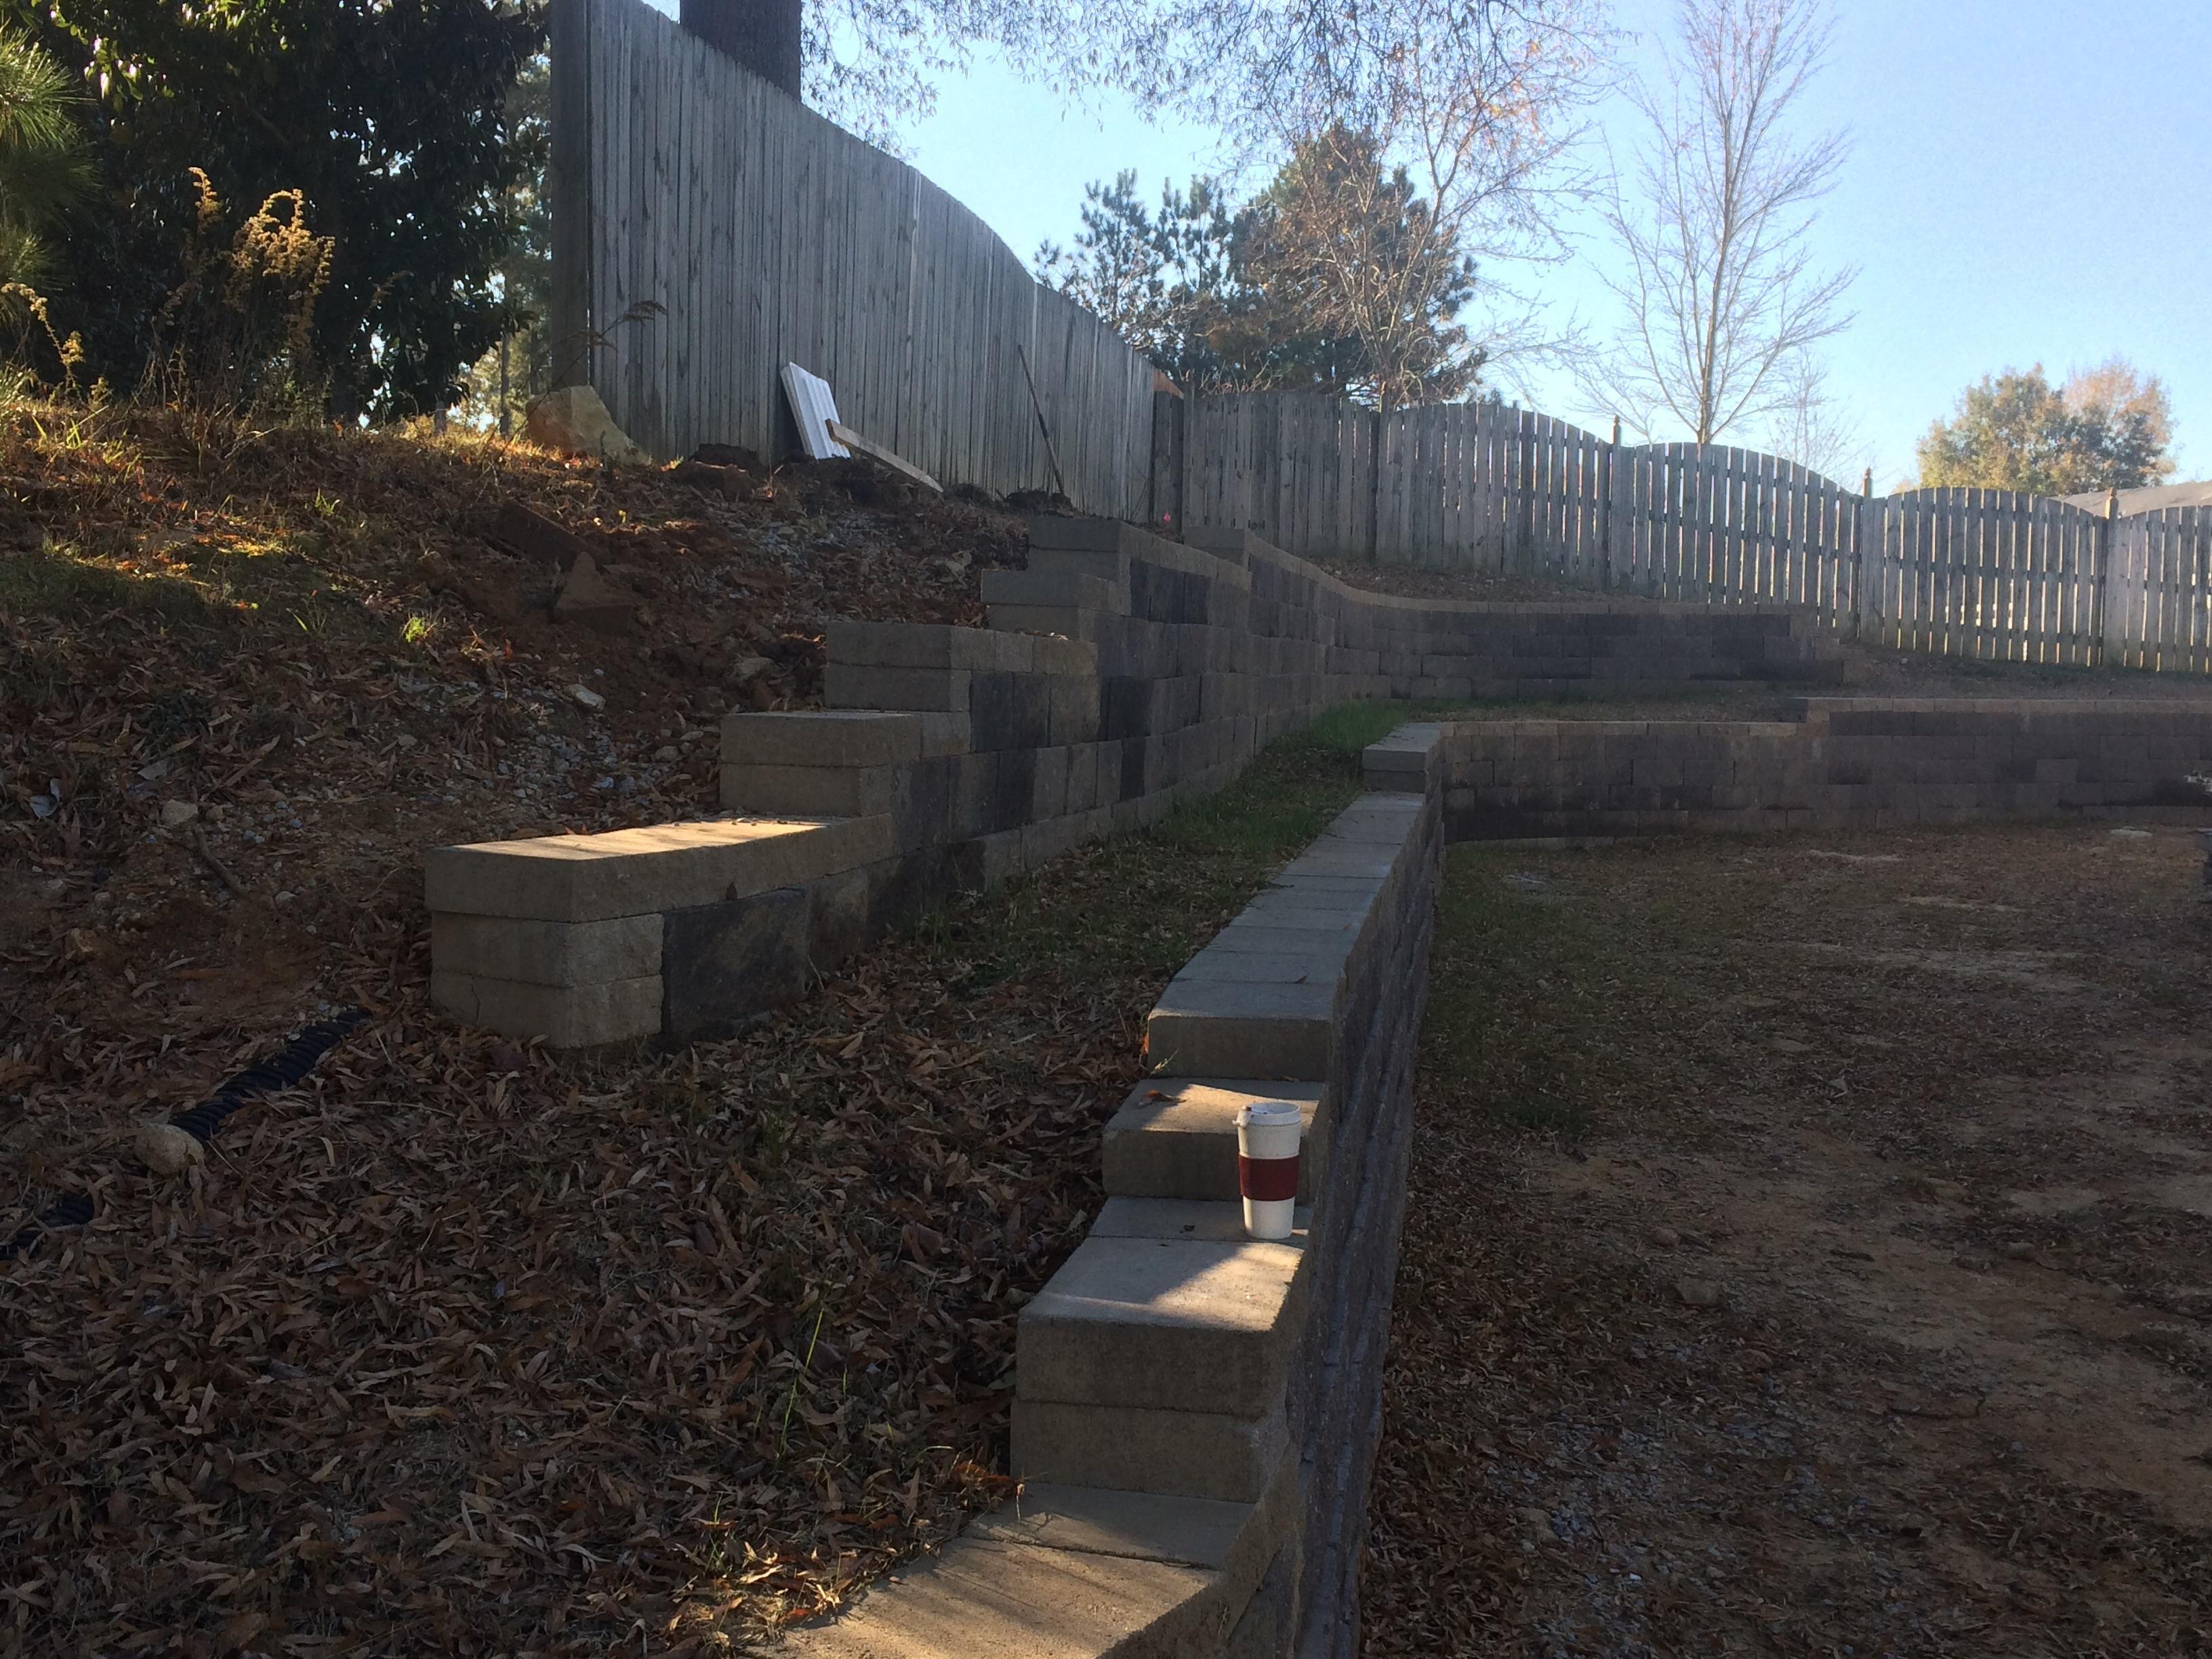 Failing retaining wall Hurley Property Services was contracted to repair and rebuild.  Walls are too close together; height of both walls determine distance b/t